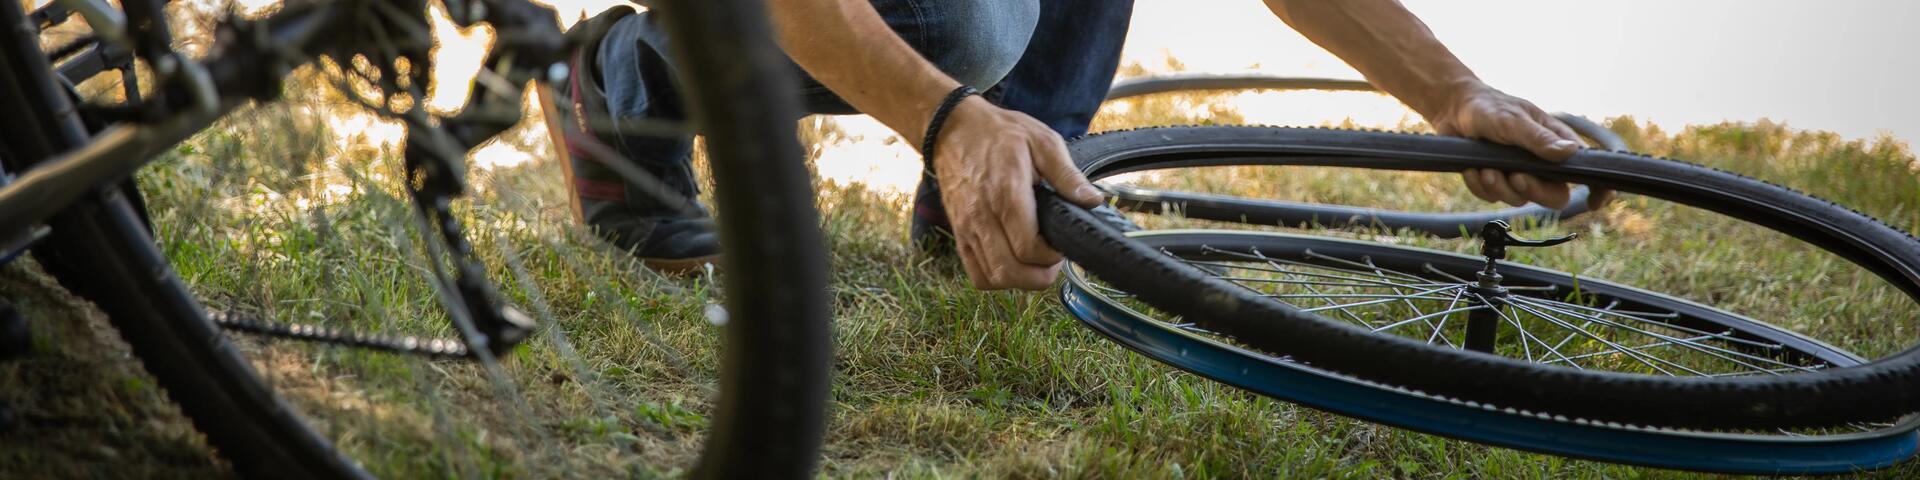 Man changing a bicycle inner tube